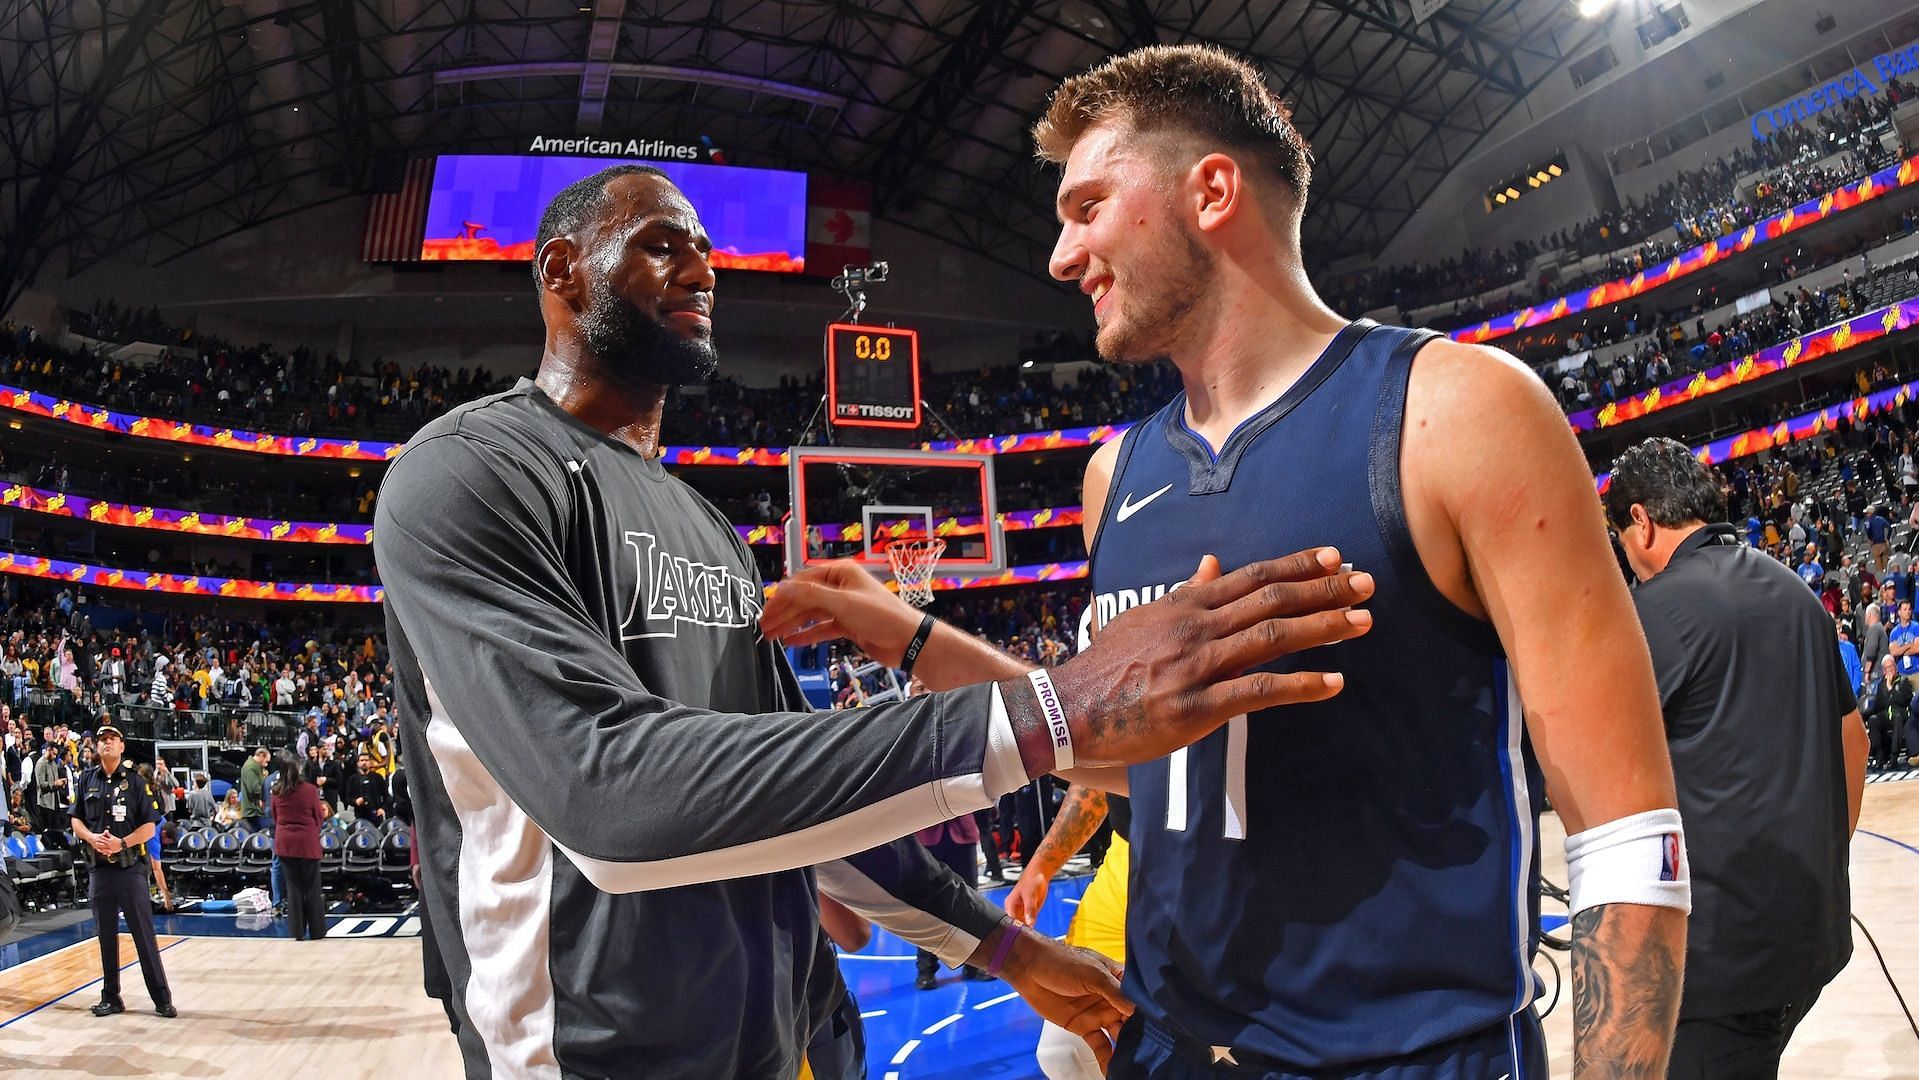 The LA Lakers and Dallas Mavericks will meet for the first time this season. [Photo: NBA.com]